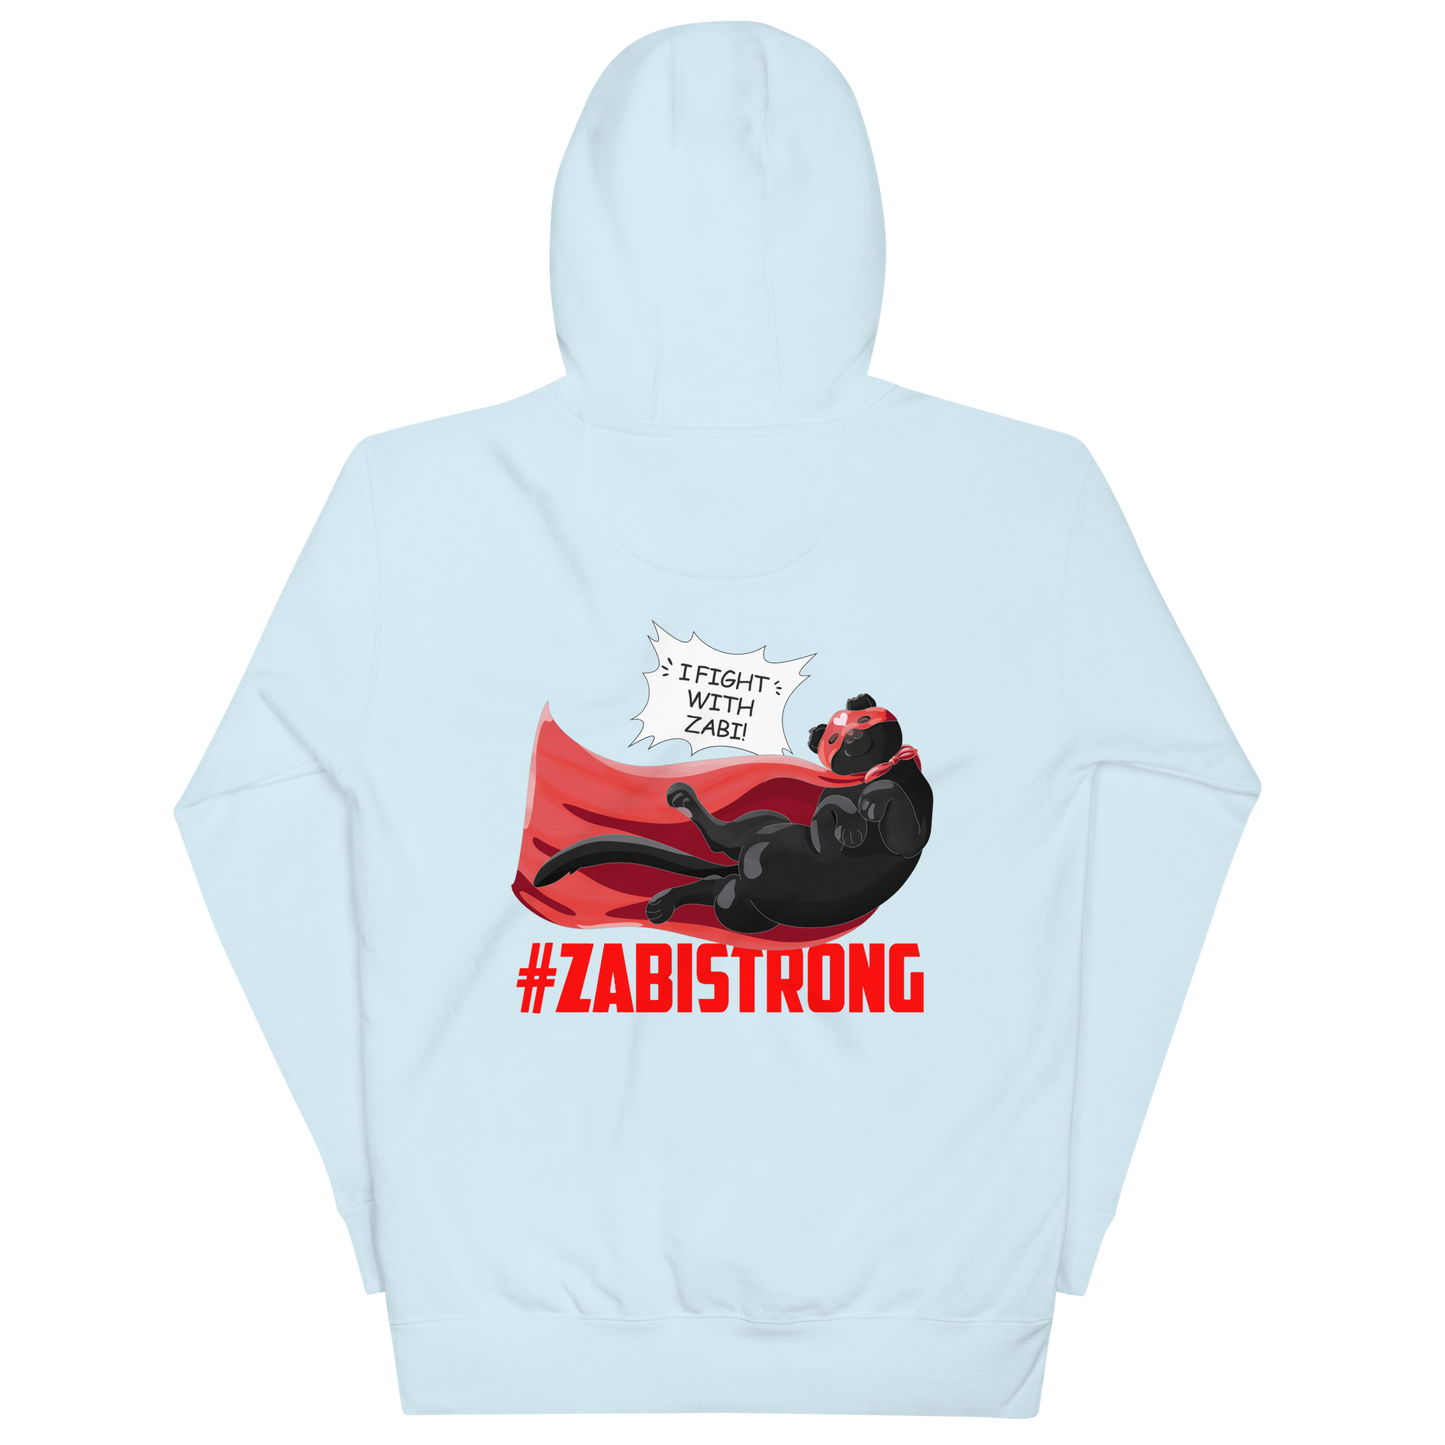 #ZABISTRONG Campaign - Unisex Hoodie